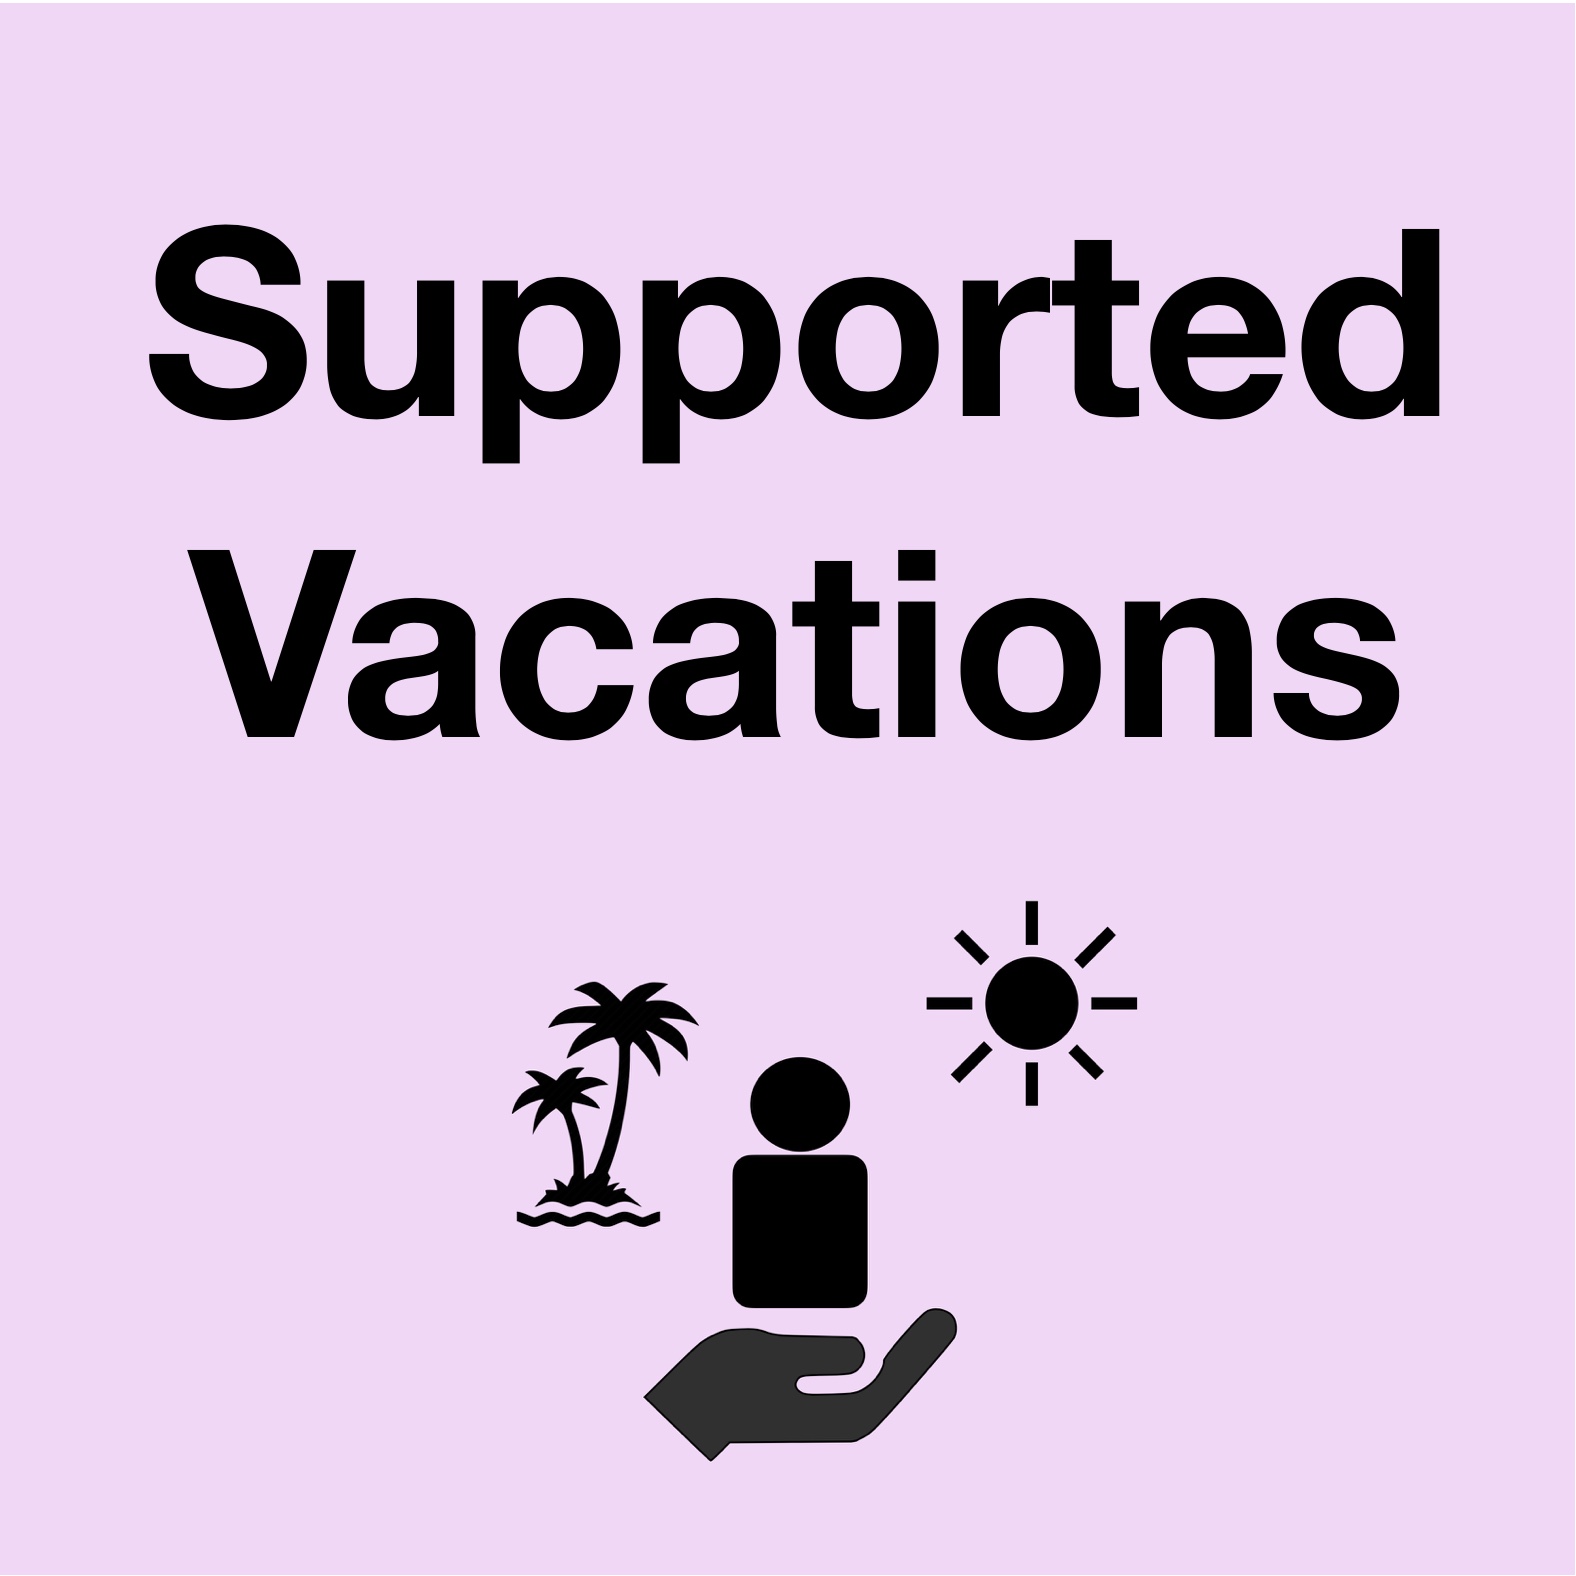 Supported Vacations